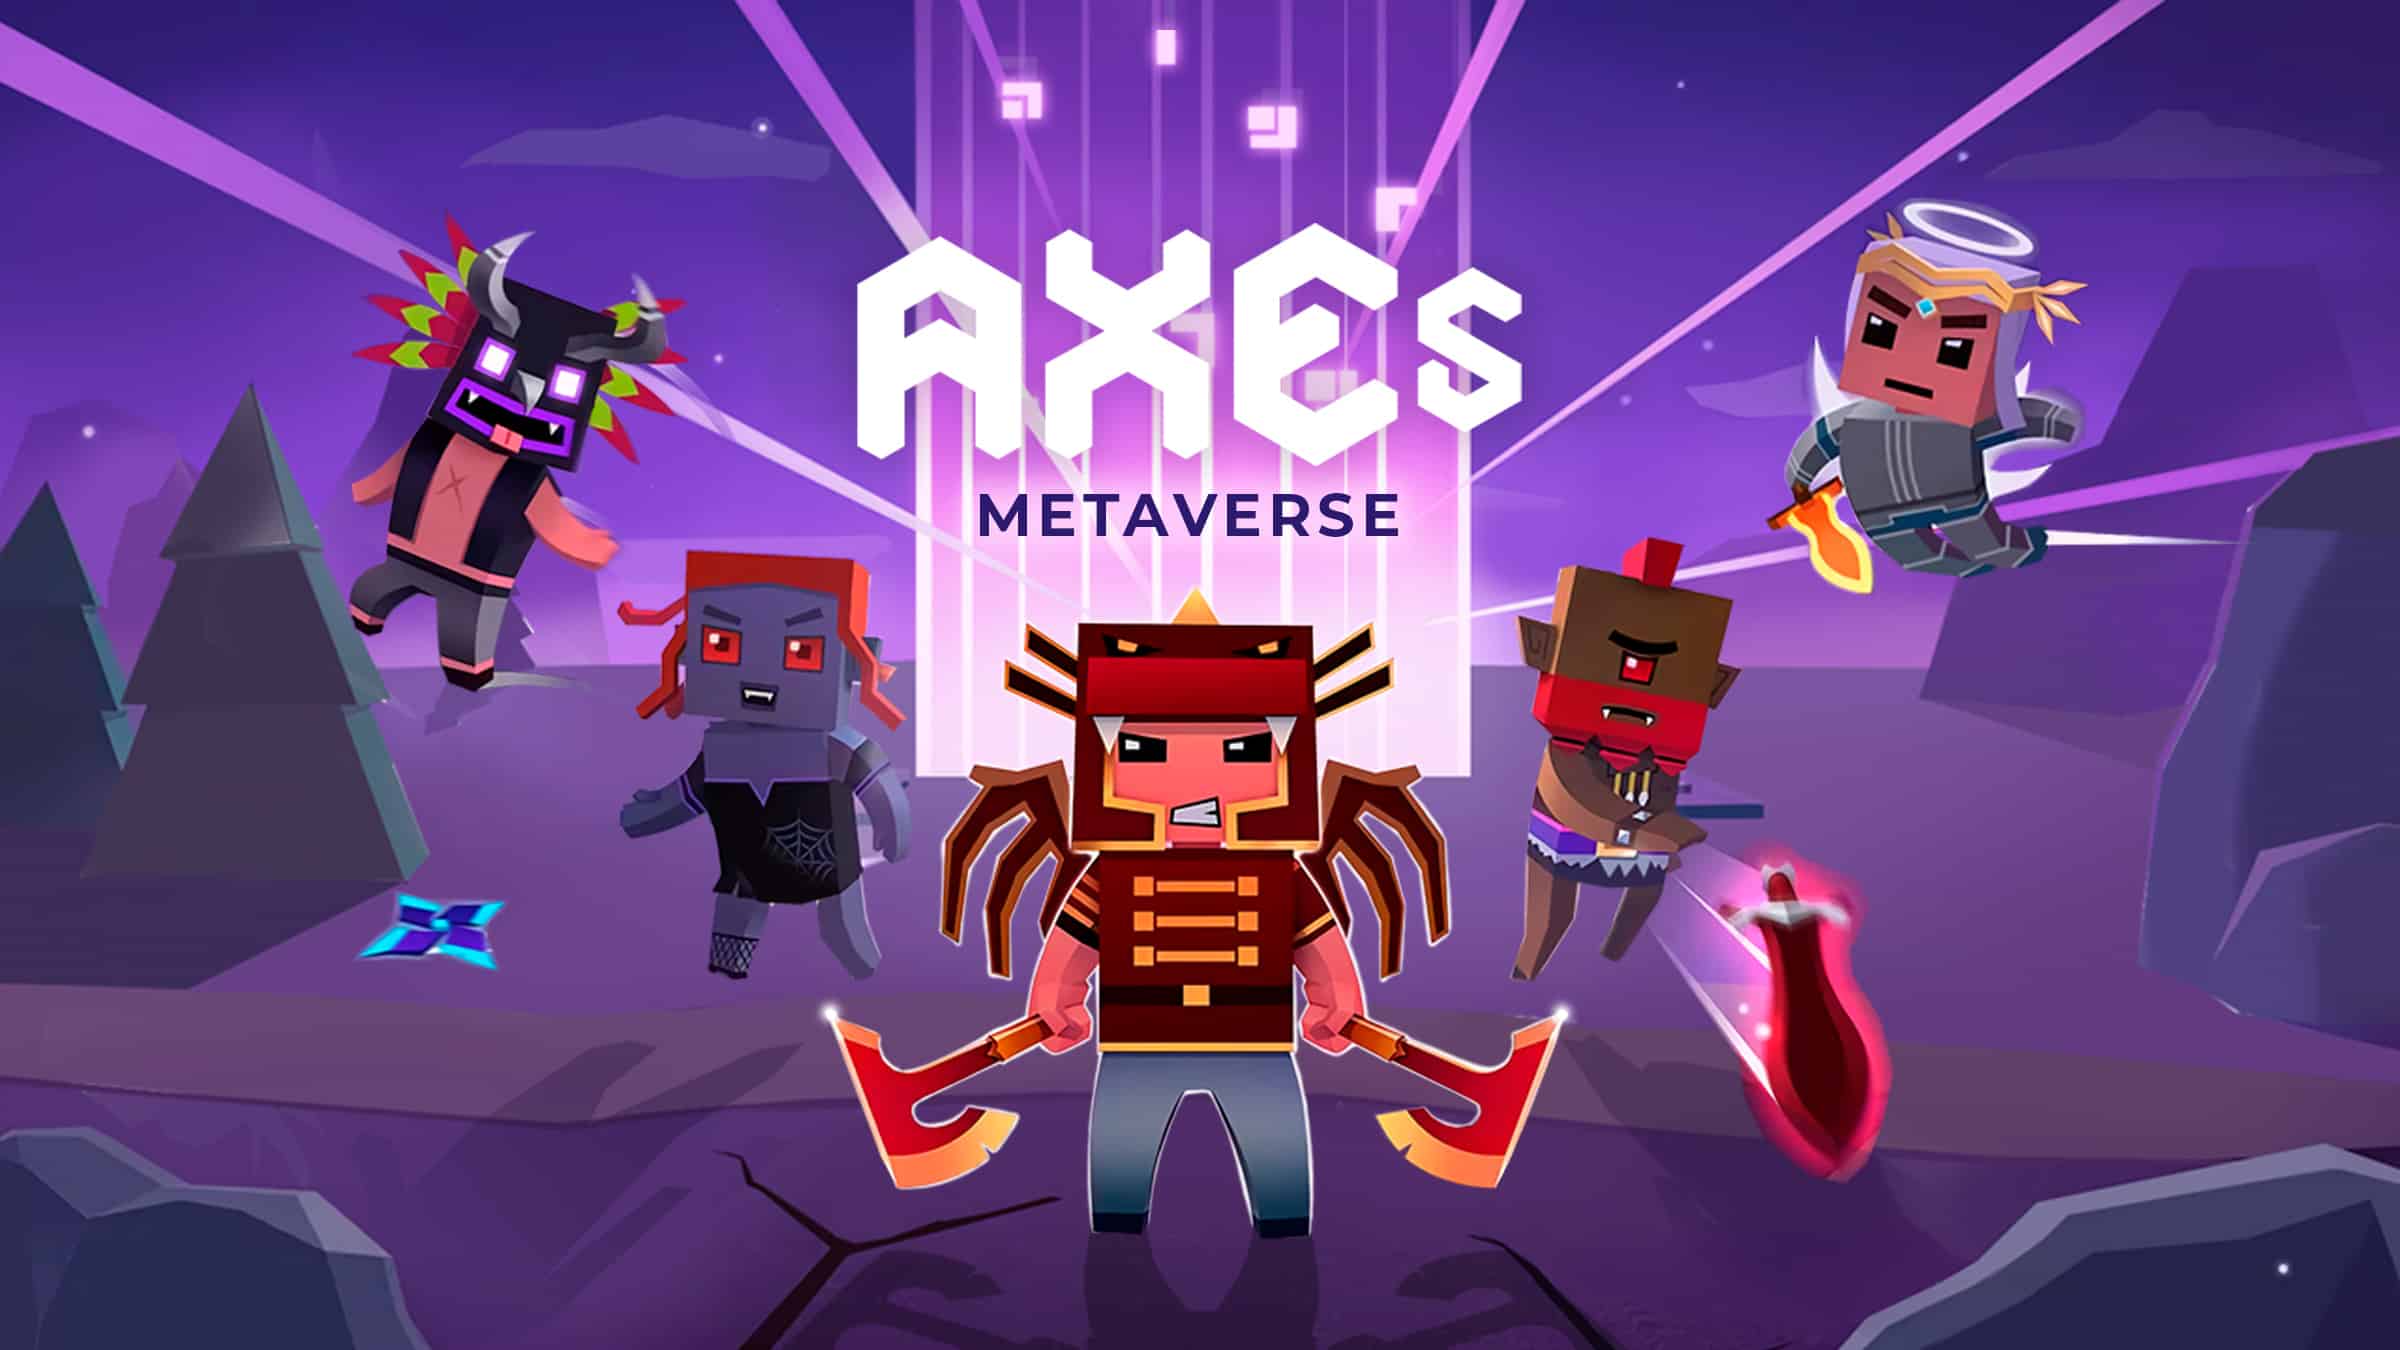 Azur-games-invested-$2m-in-axes-metaverse-gaming-project-featuring-nft-technology